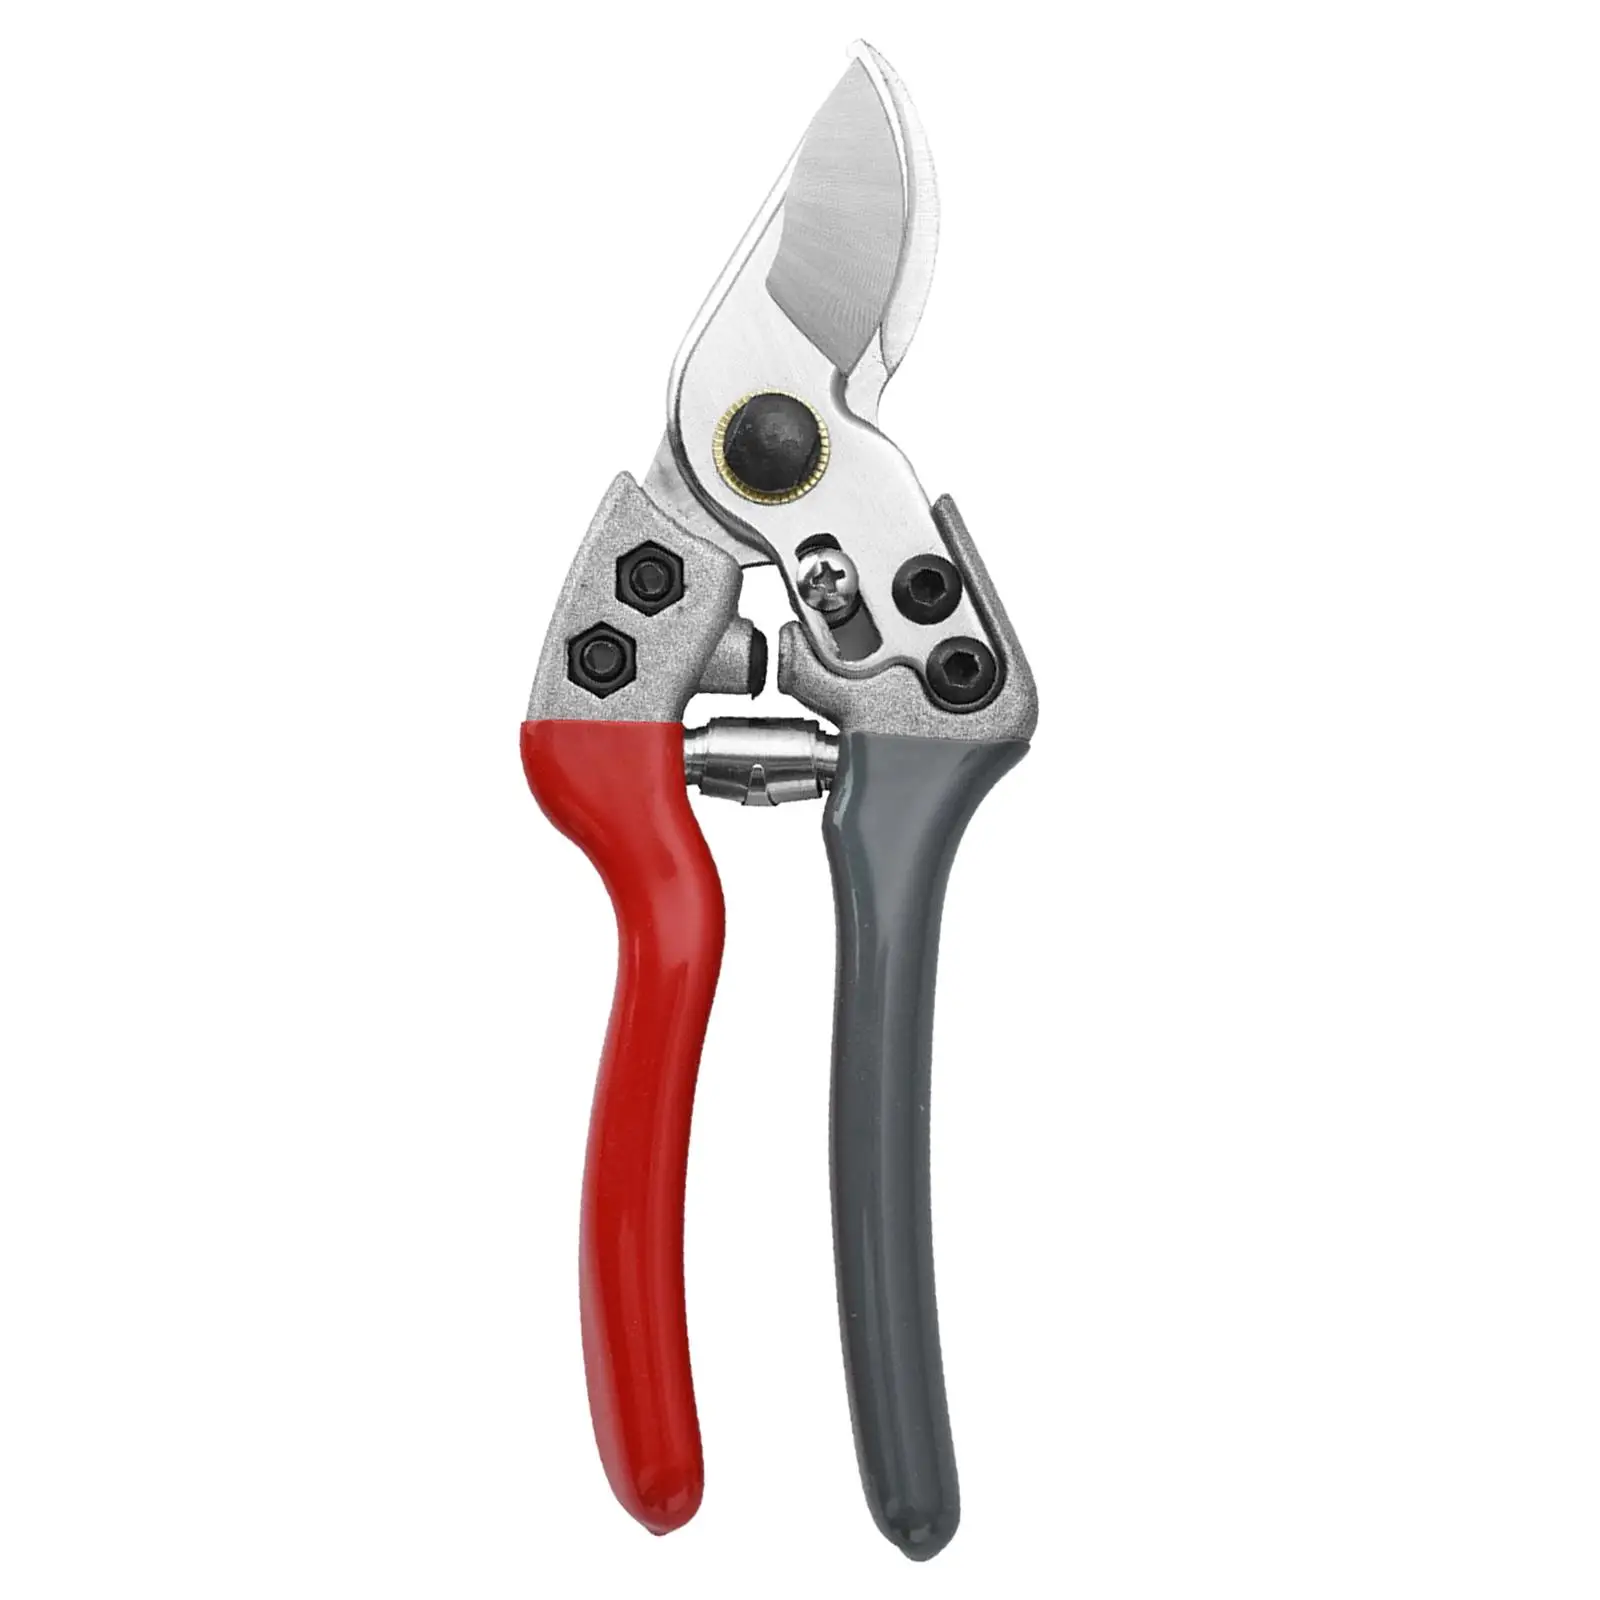 Pruning shear Gardening Tools Branch Cutter Trimming Hand Pruners Garden Clippers for Orchard Bonsai Bushes Branches